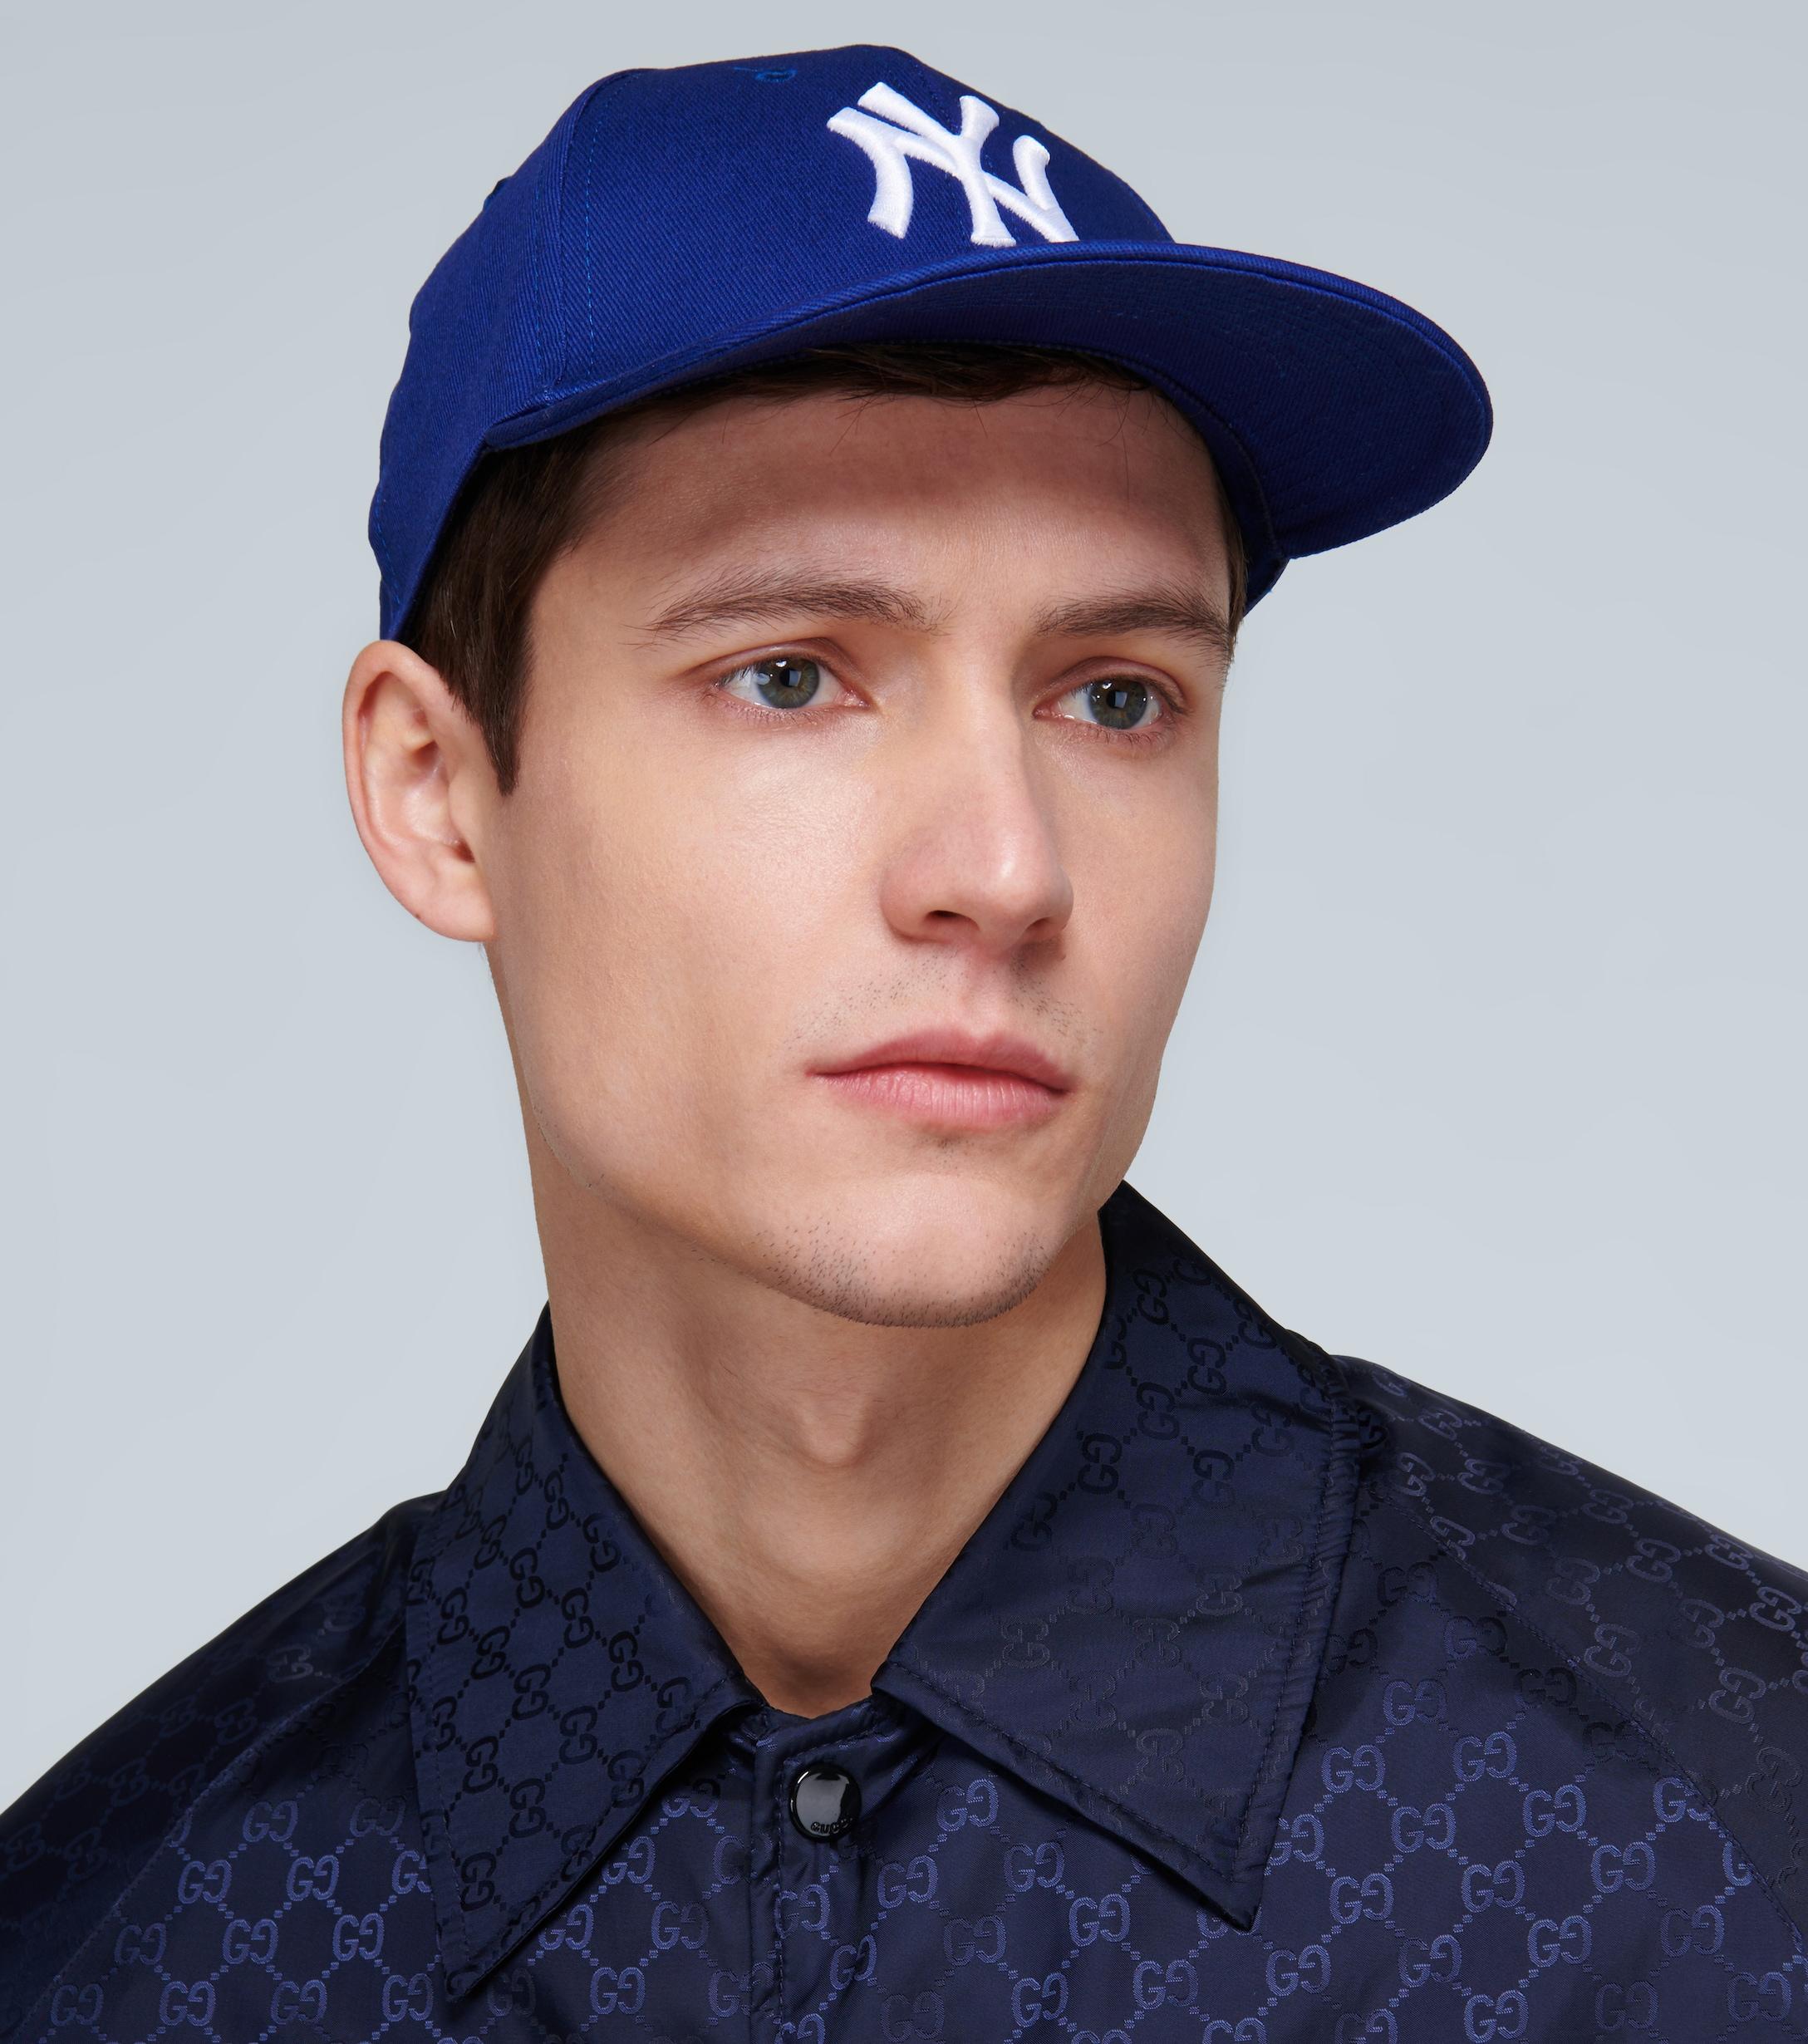 Gucci x NY Yankees Capsule: Where to Buy